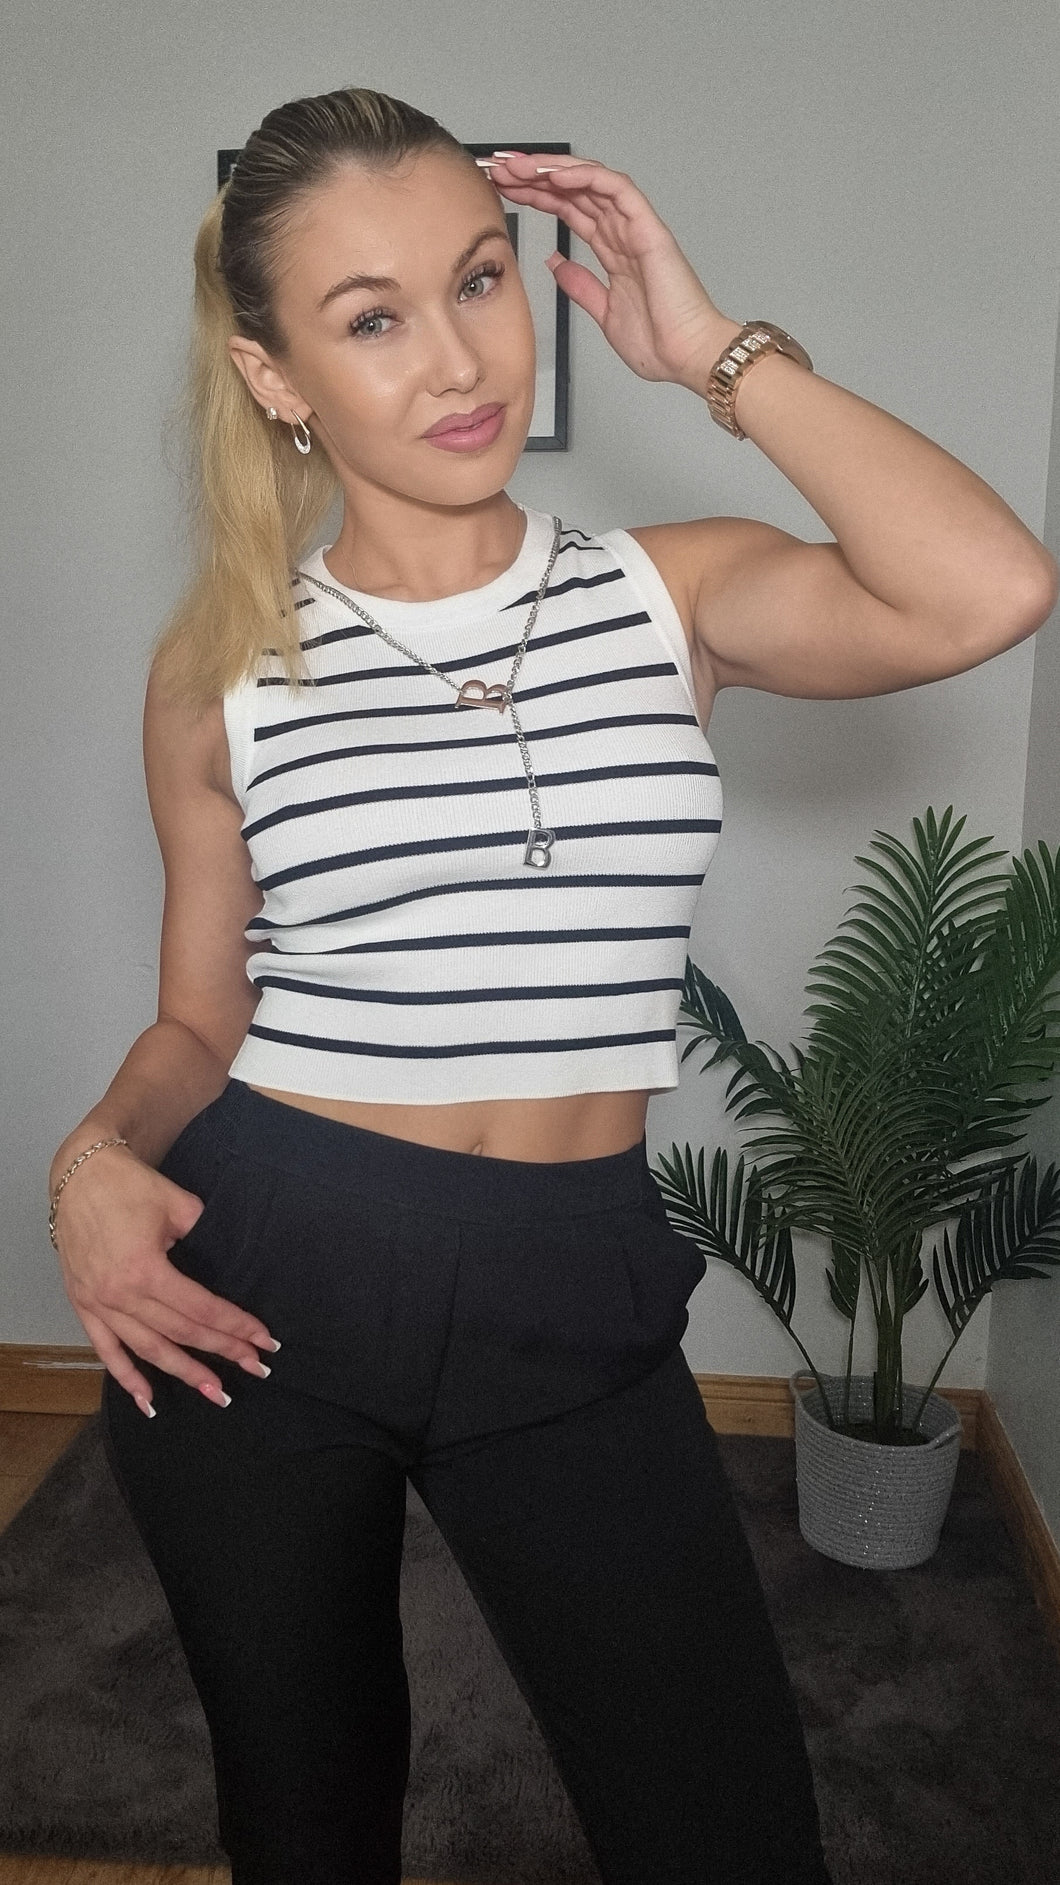 black and white striped top